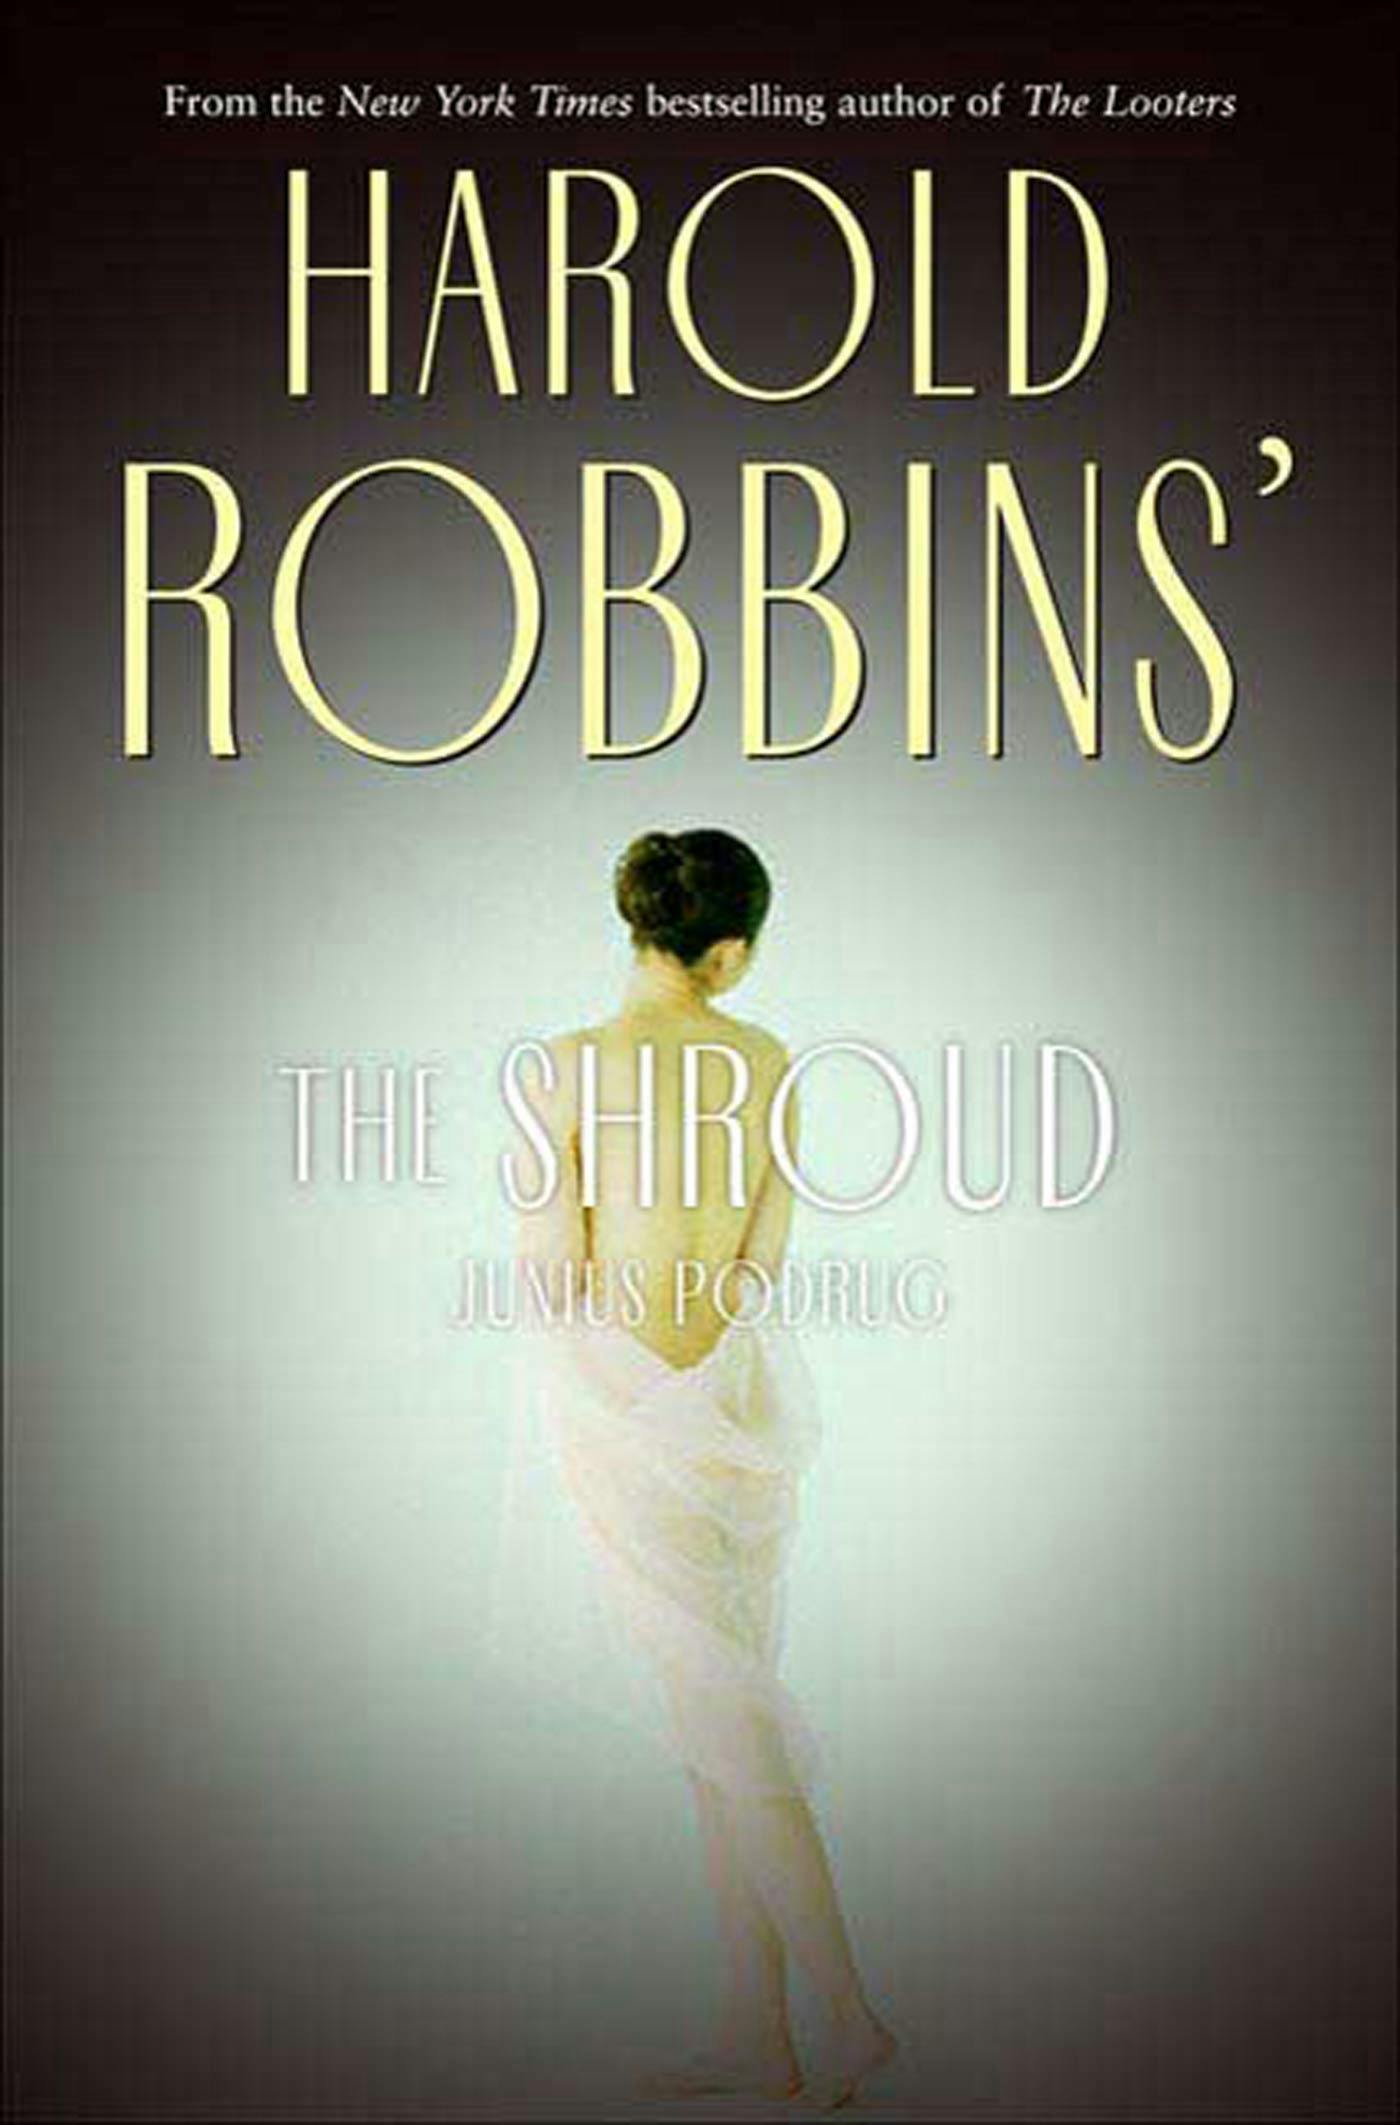 Cover for the book titled as: The Shroud